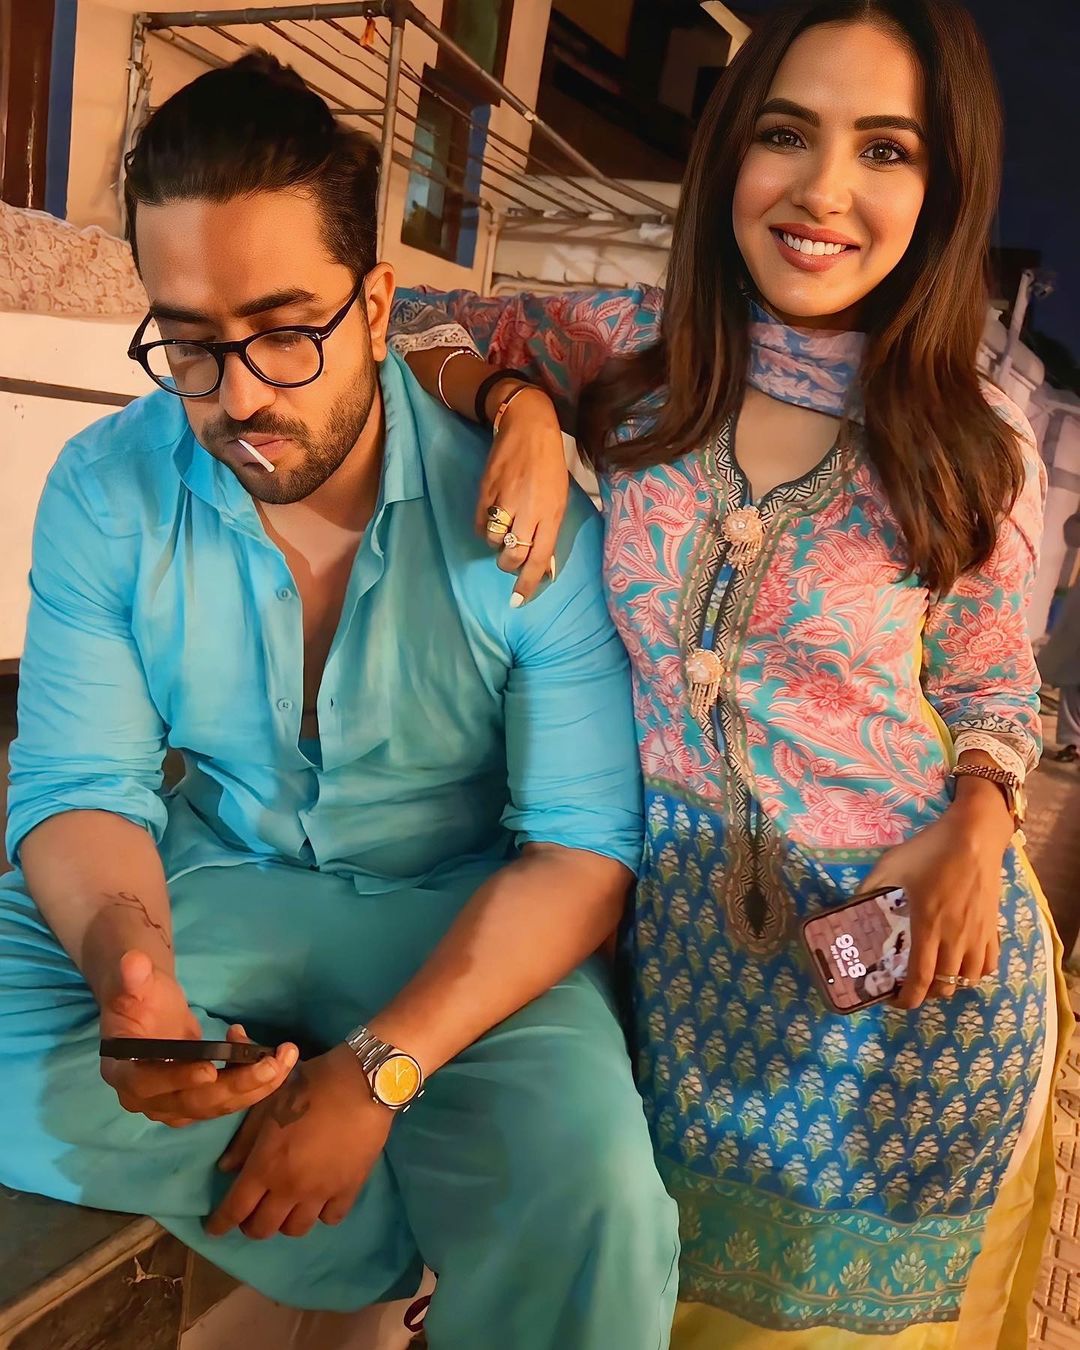 Cutest Couple Aly Goni And Jasmine Bhasin Impressed Fans With Radiate Joy In Pastel Pink Outfits. Let’s See About It!